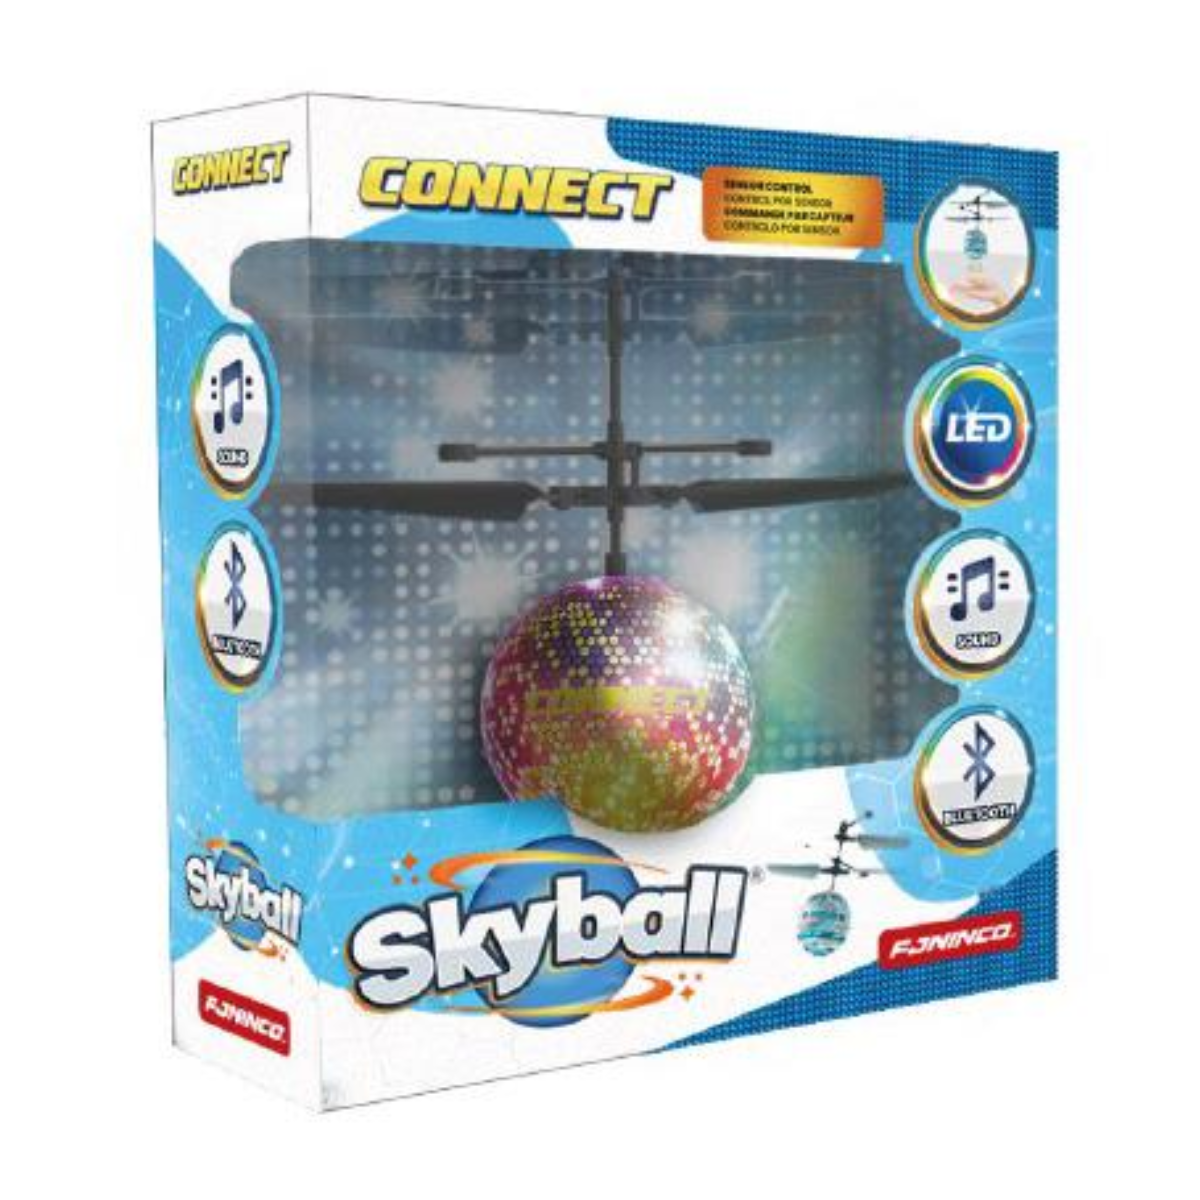 Skyball Light Connect